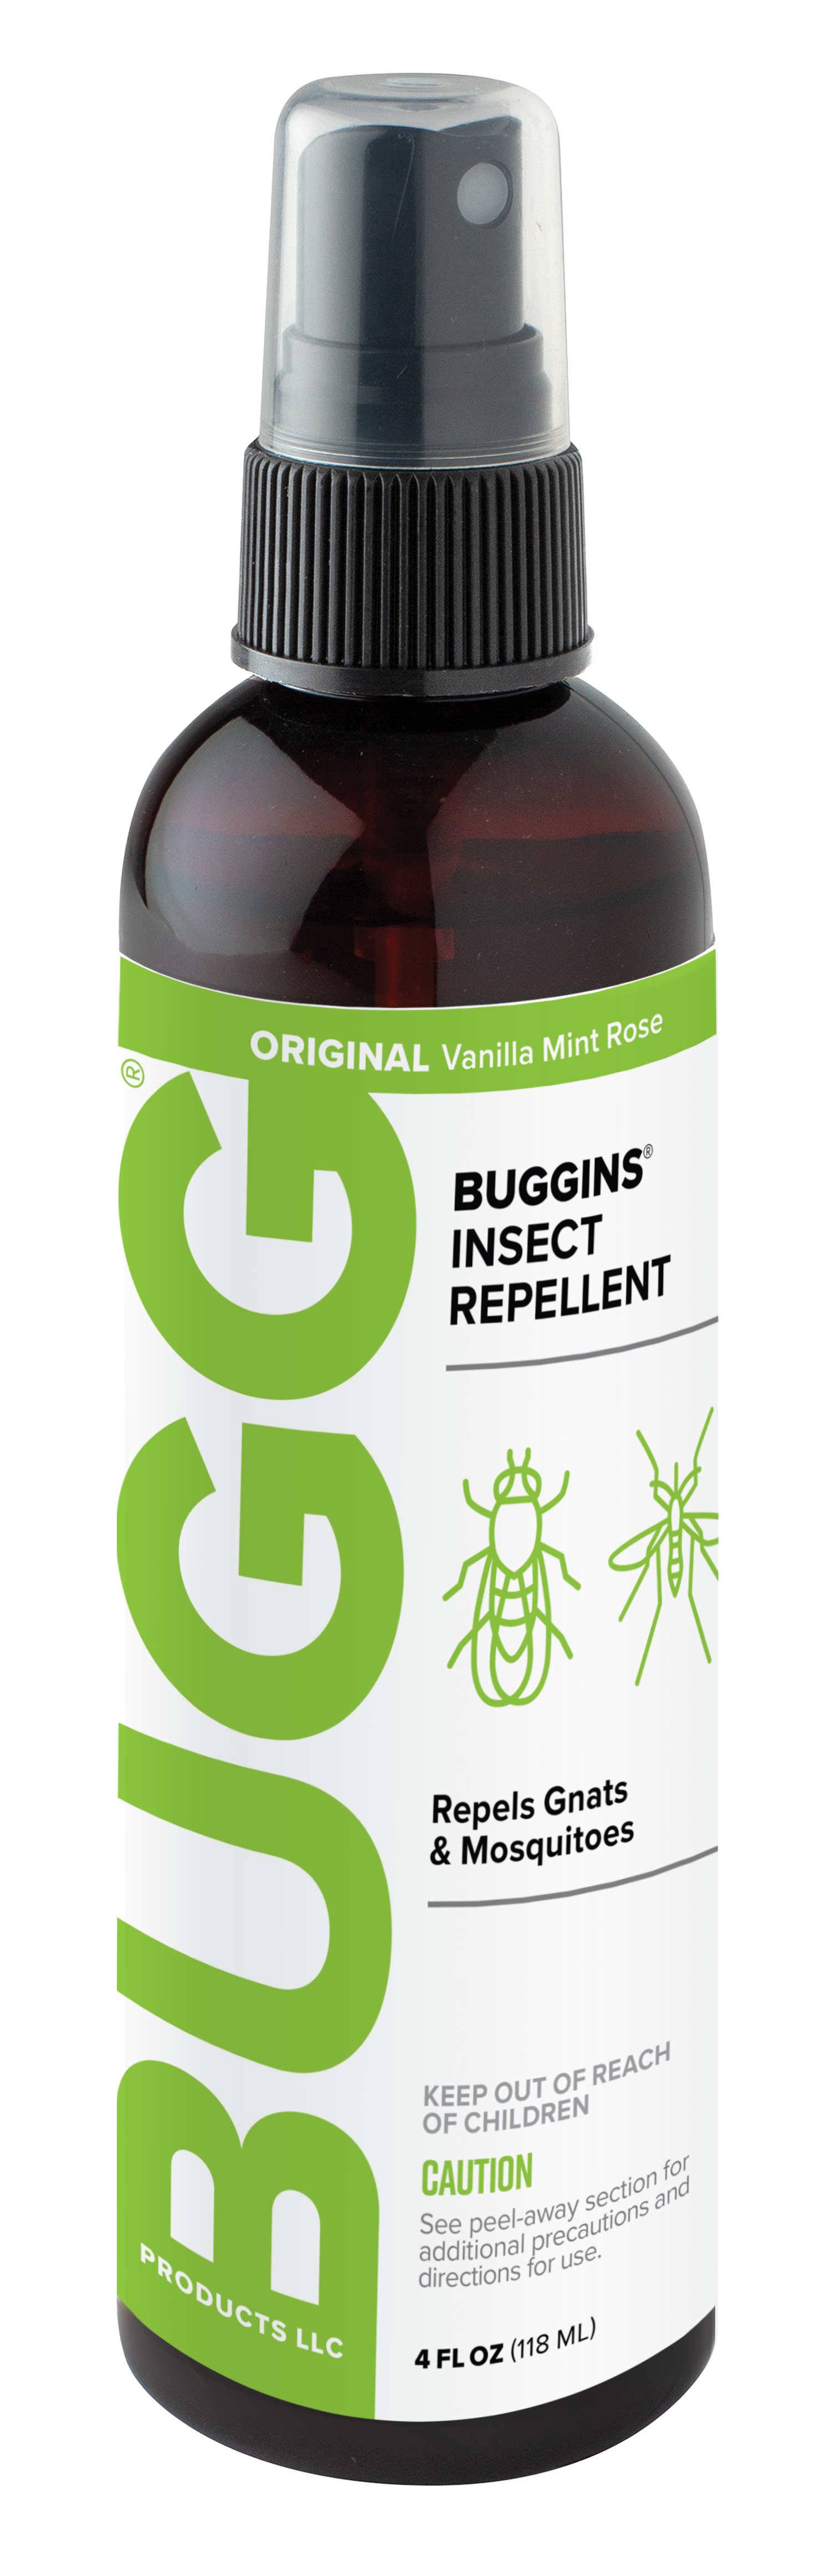 BUGGINS Original gnat & mosquito Insect Repellent - BUGG Products LLC